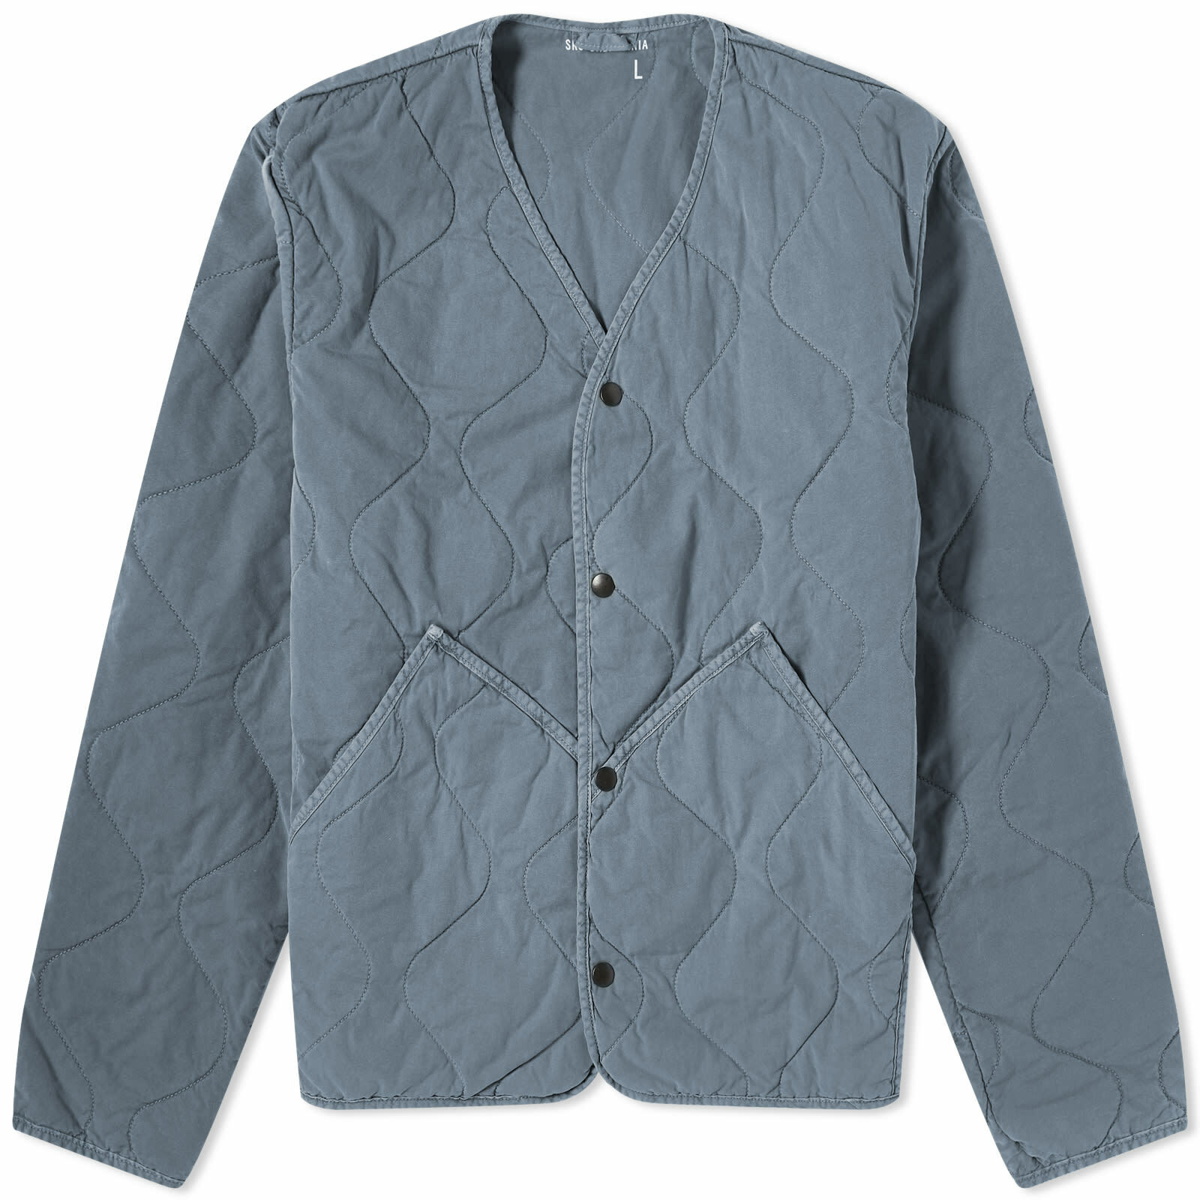 Photo: Save Khaki Men's Flight Quilted Liner Jacket in Navy